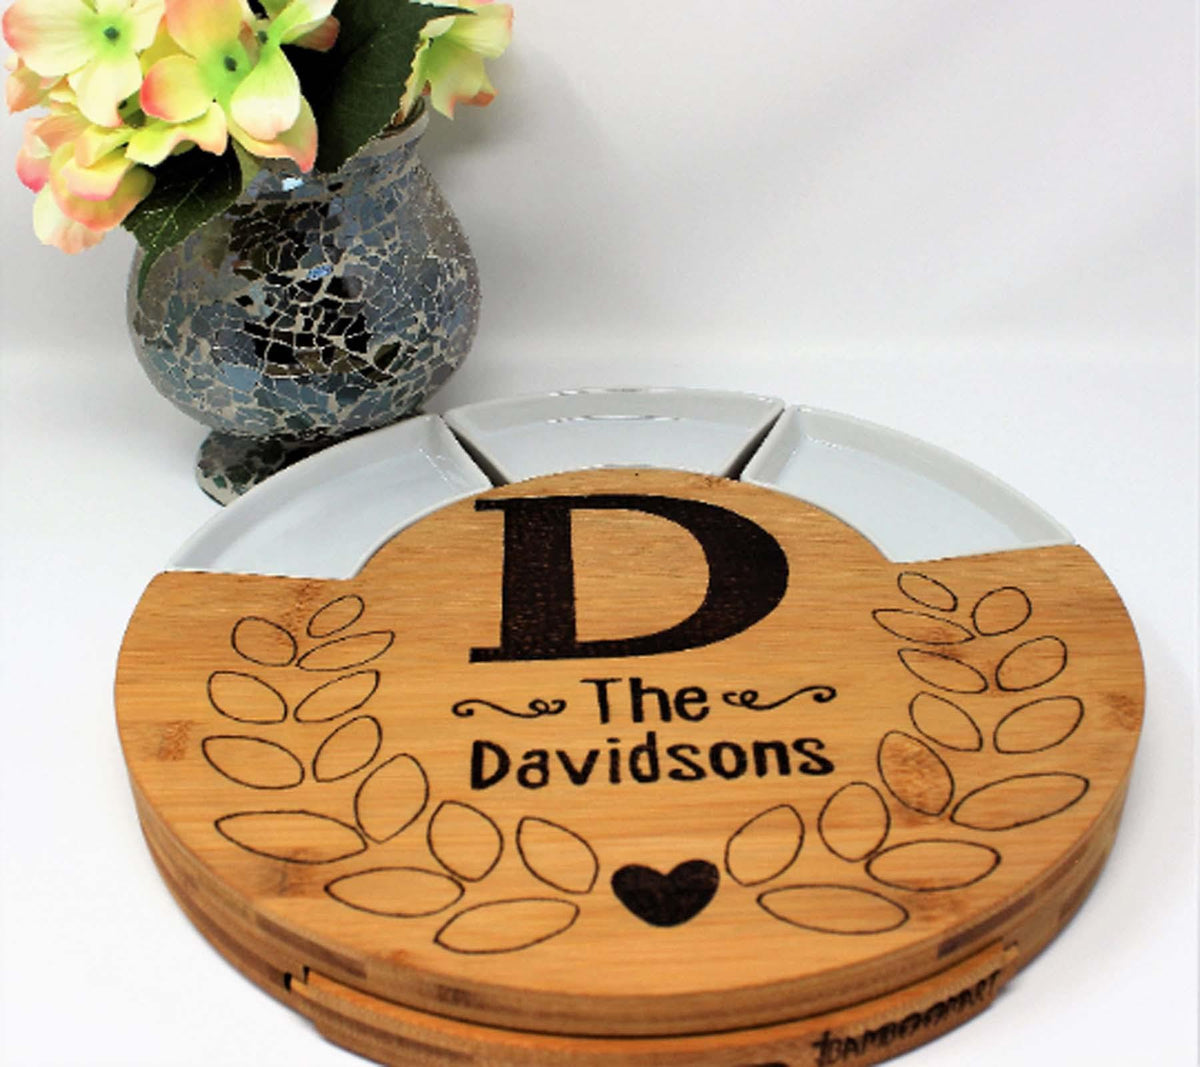 Monogrammed Cheese board | Personalized Cheese Board Set | Custom Cheese Board | Wooden Cheese Board | Charcuterie Board | Round - This &amp; That Solutions - Monogrammed Cheese board | Personalized Cheese Board Set | Custom Cheese Board | Wooden Cheese Board | Charcuterie Board | Round - Personalized Gifts &amp; Custom Home Decor